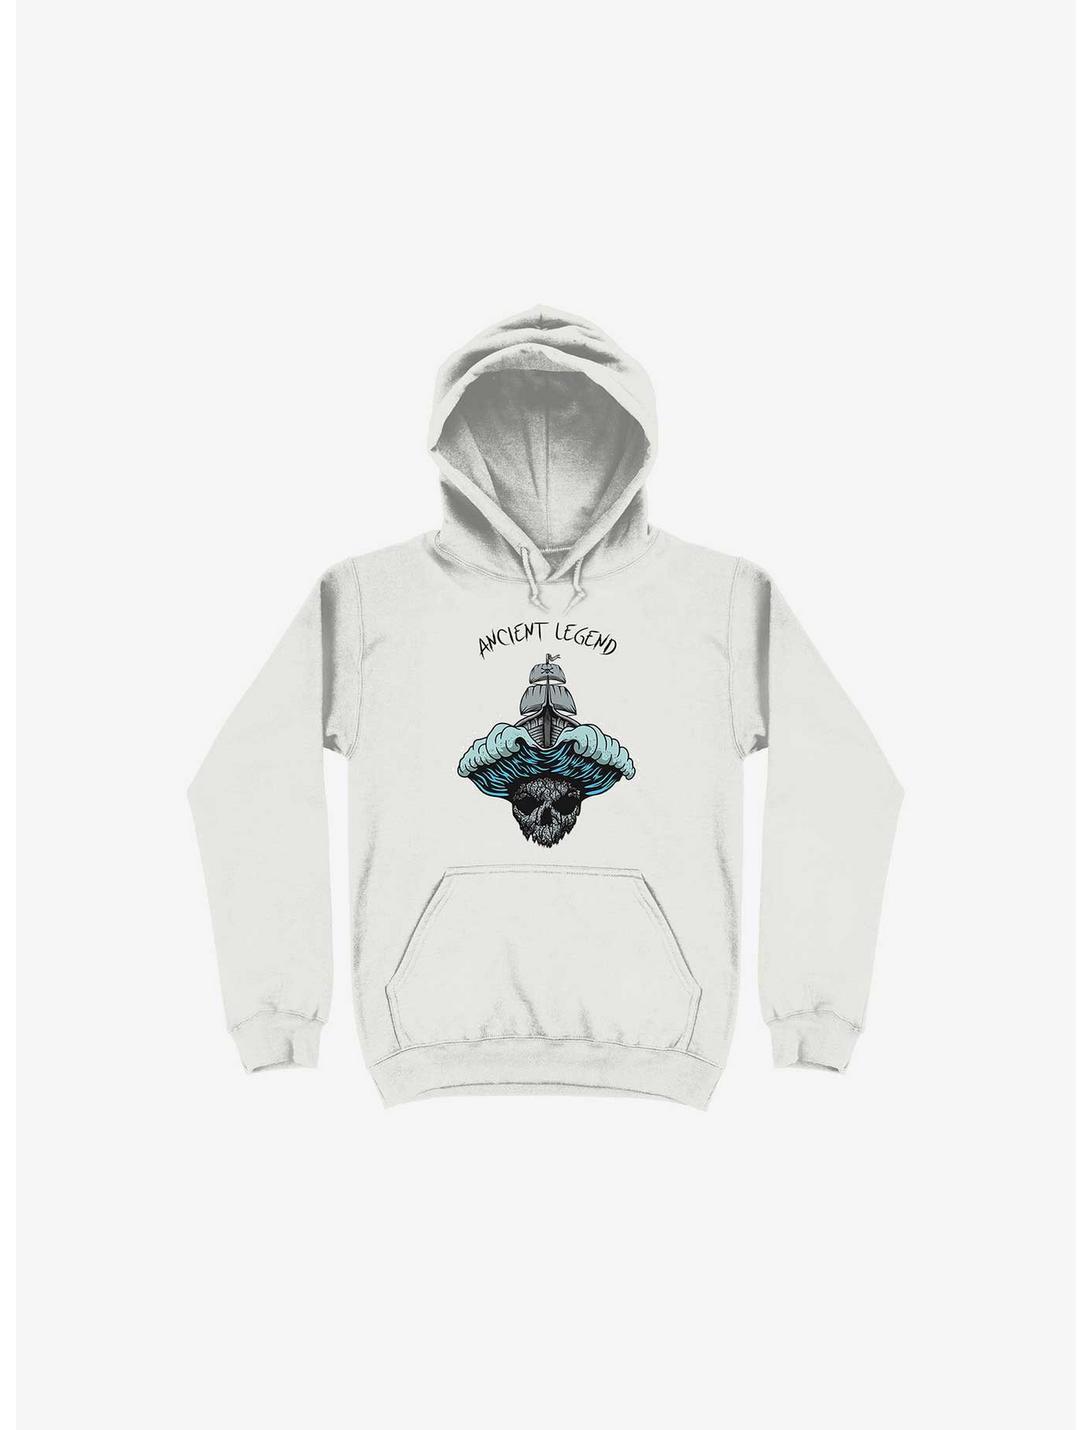 Ancient Legend Of The Sea 2 (On Bright) Hoodie, WHITE, hi-res